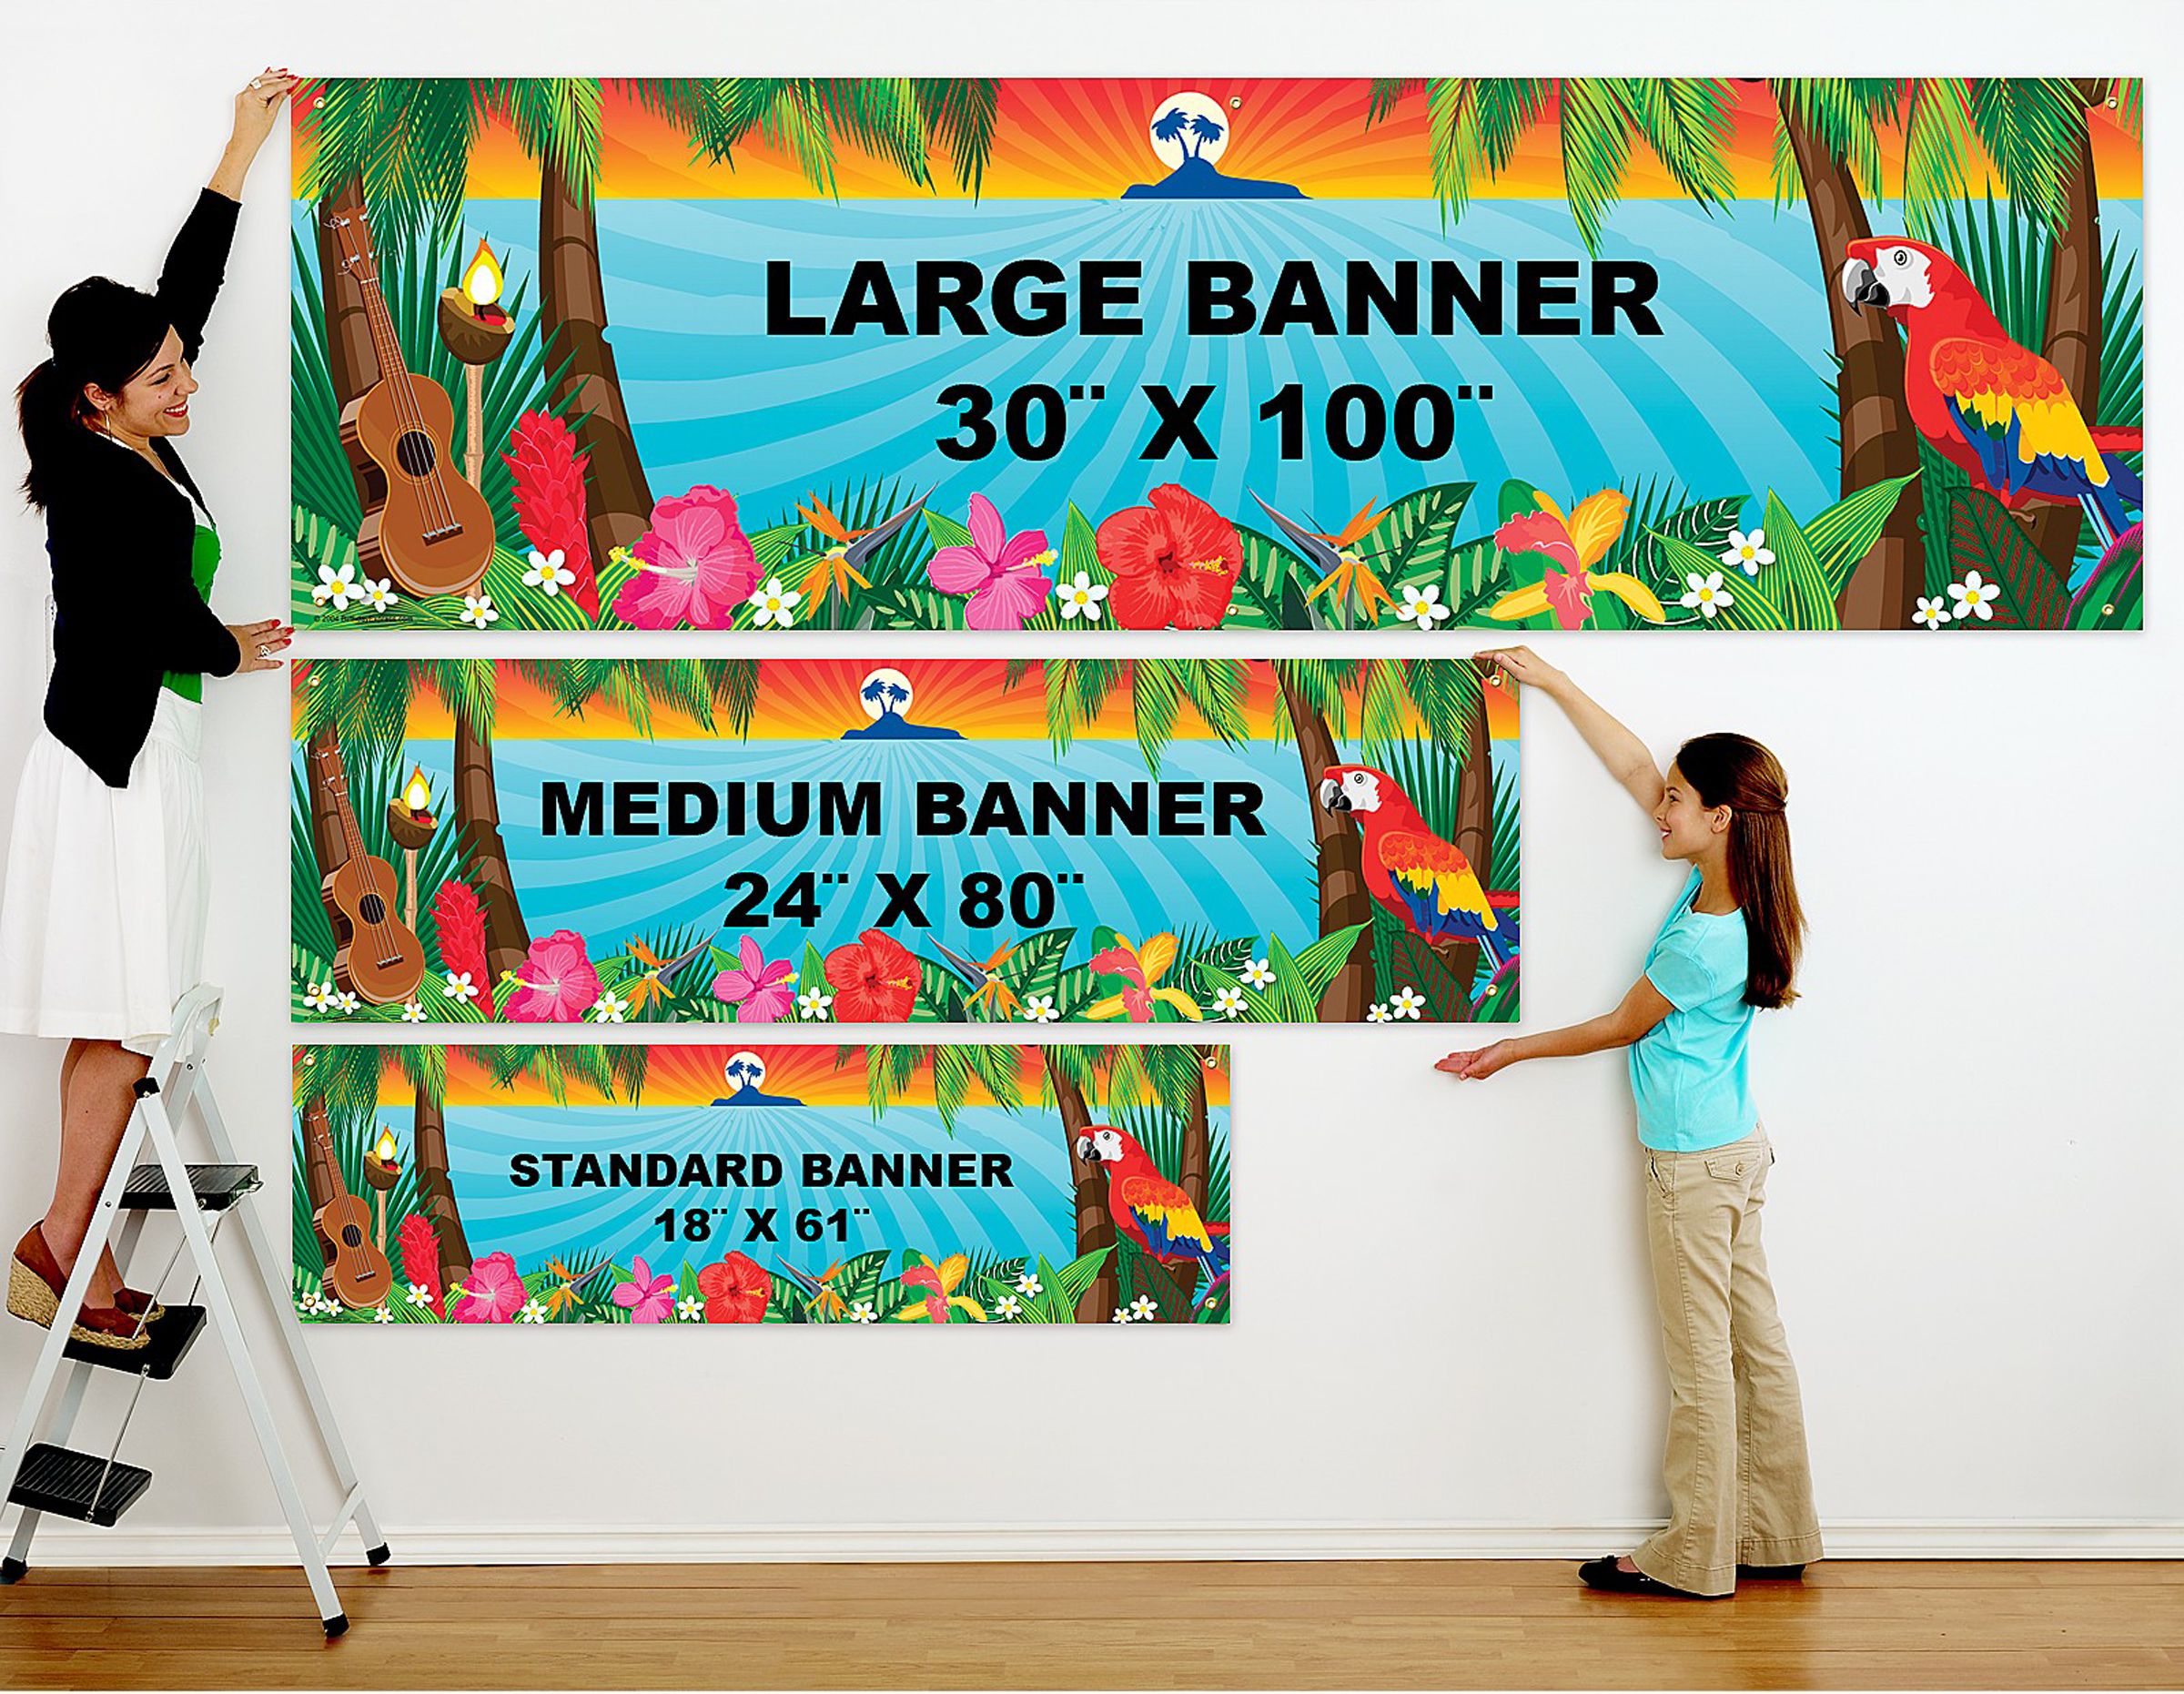 Indoor & Outdoor Banners Poway Commercial Sign Installer, Banners, T-Shirt Printing, Digital Printing